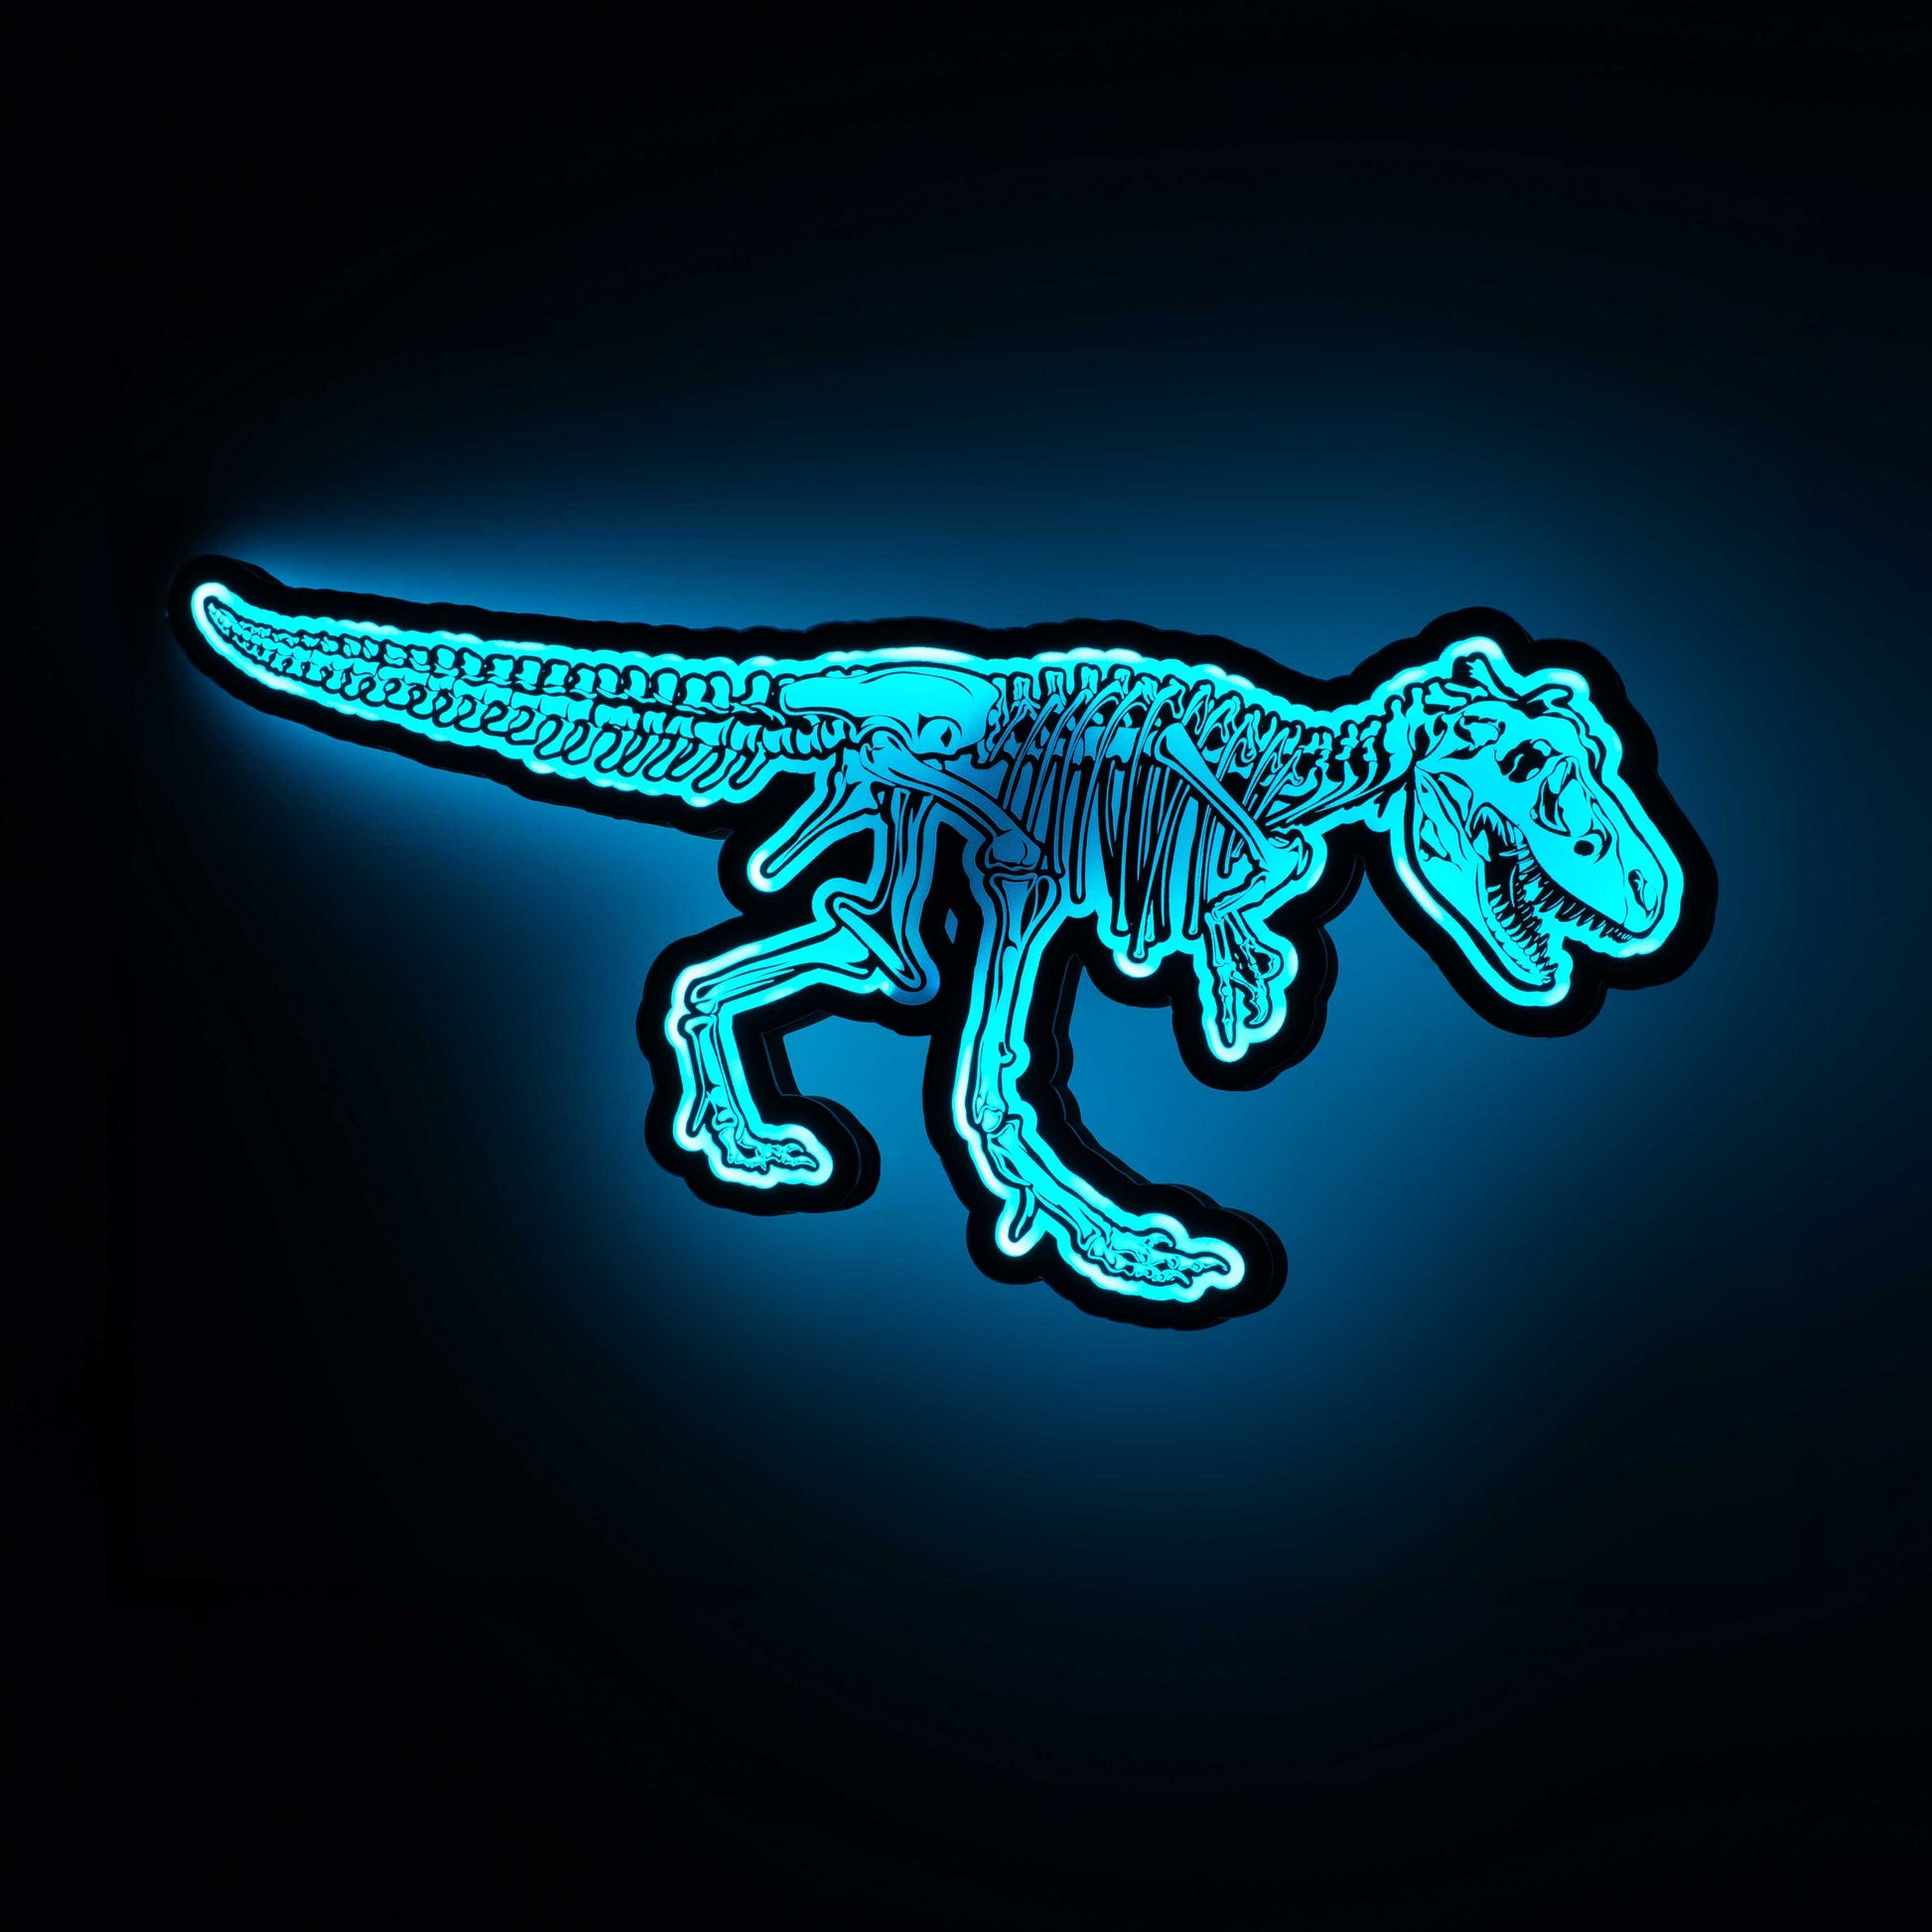 image of a 3d wall mounted acrylic light, backlit by blue led lights, featuring an epic dinosaur themed illustration of a t-rex skeleton.